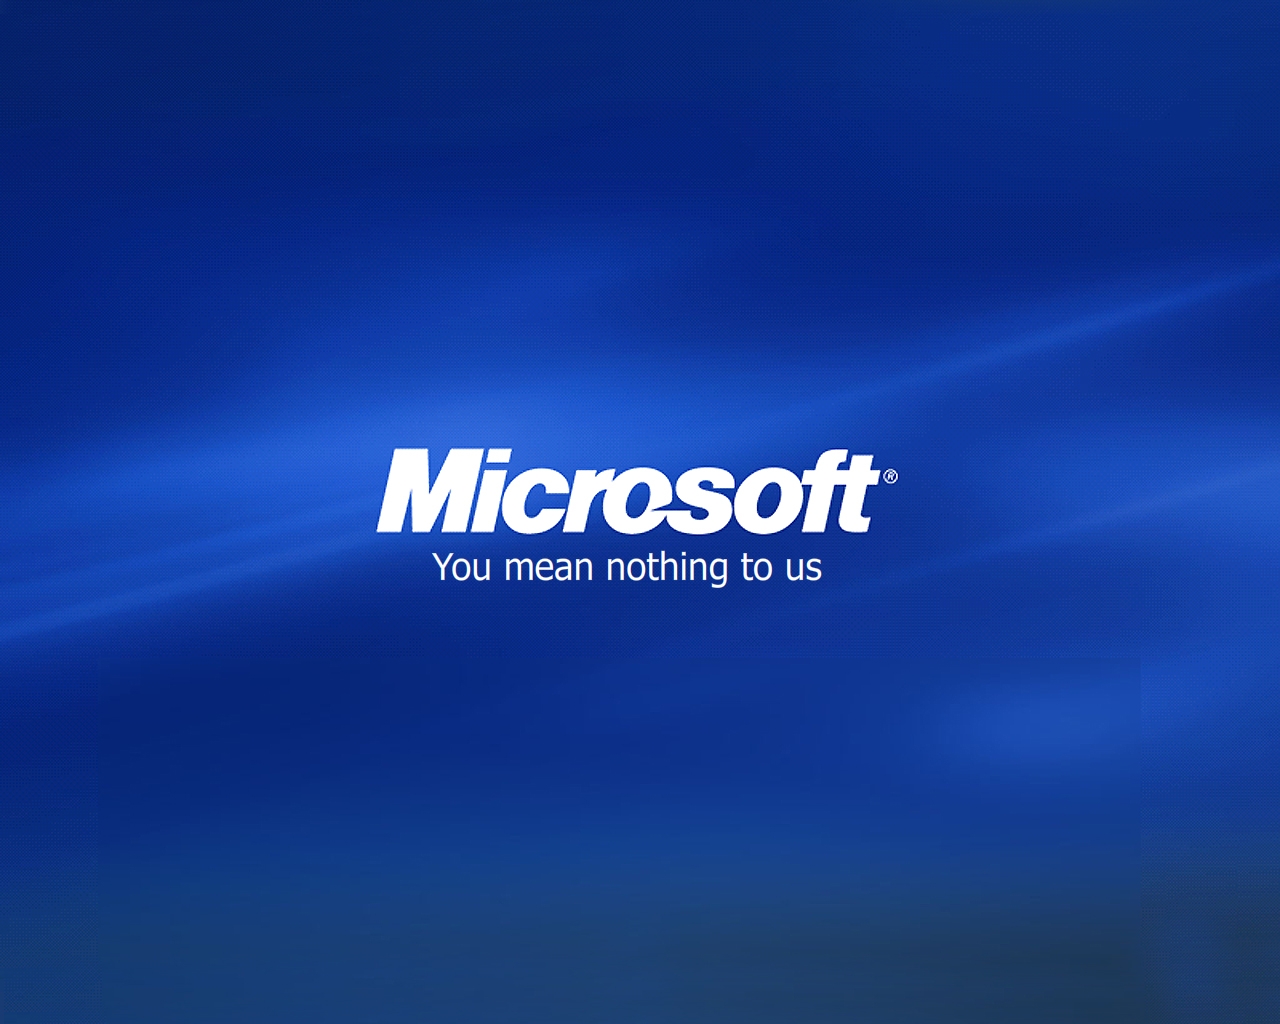 Microsoft Backgrounds Download HD Wallpapers 1280x1024